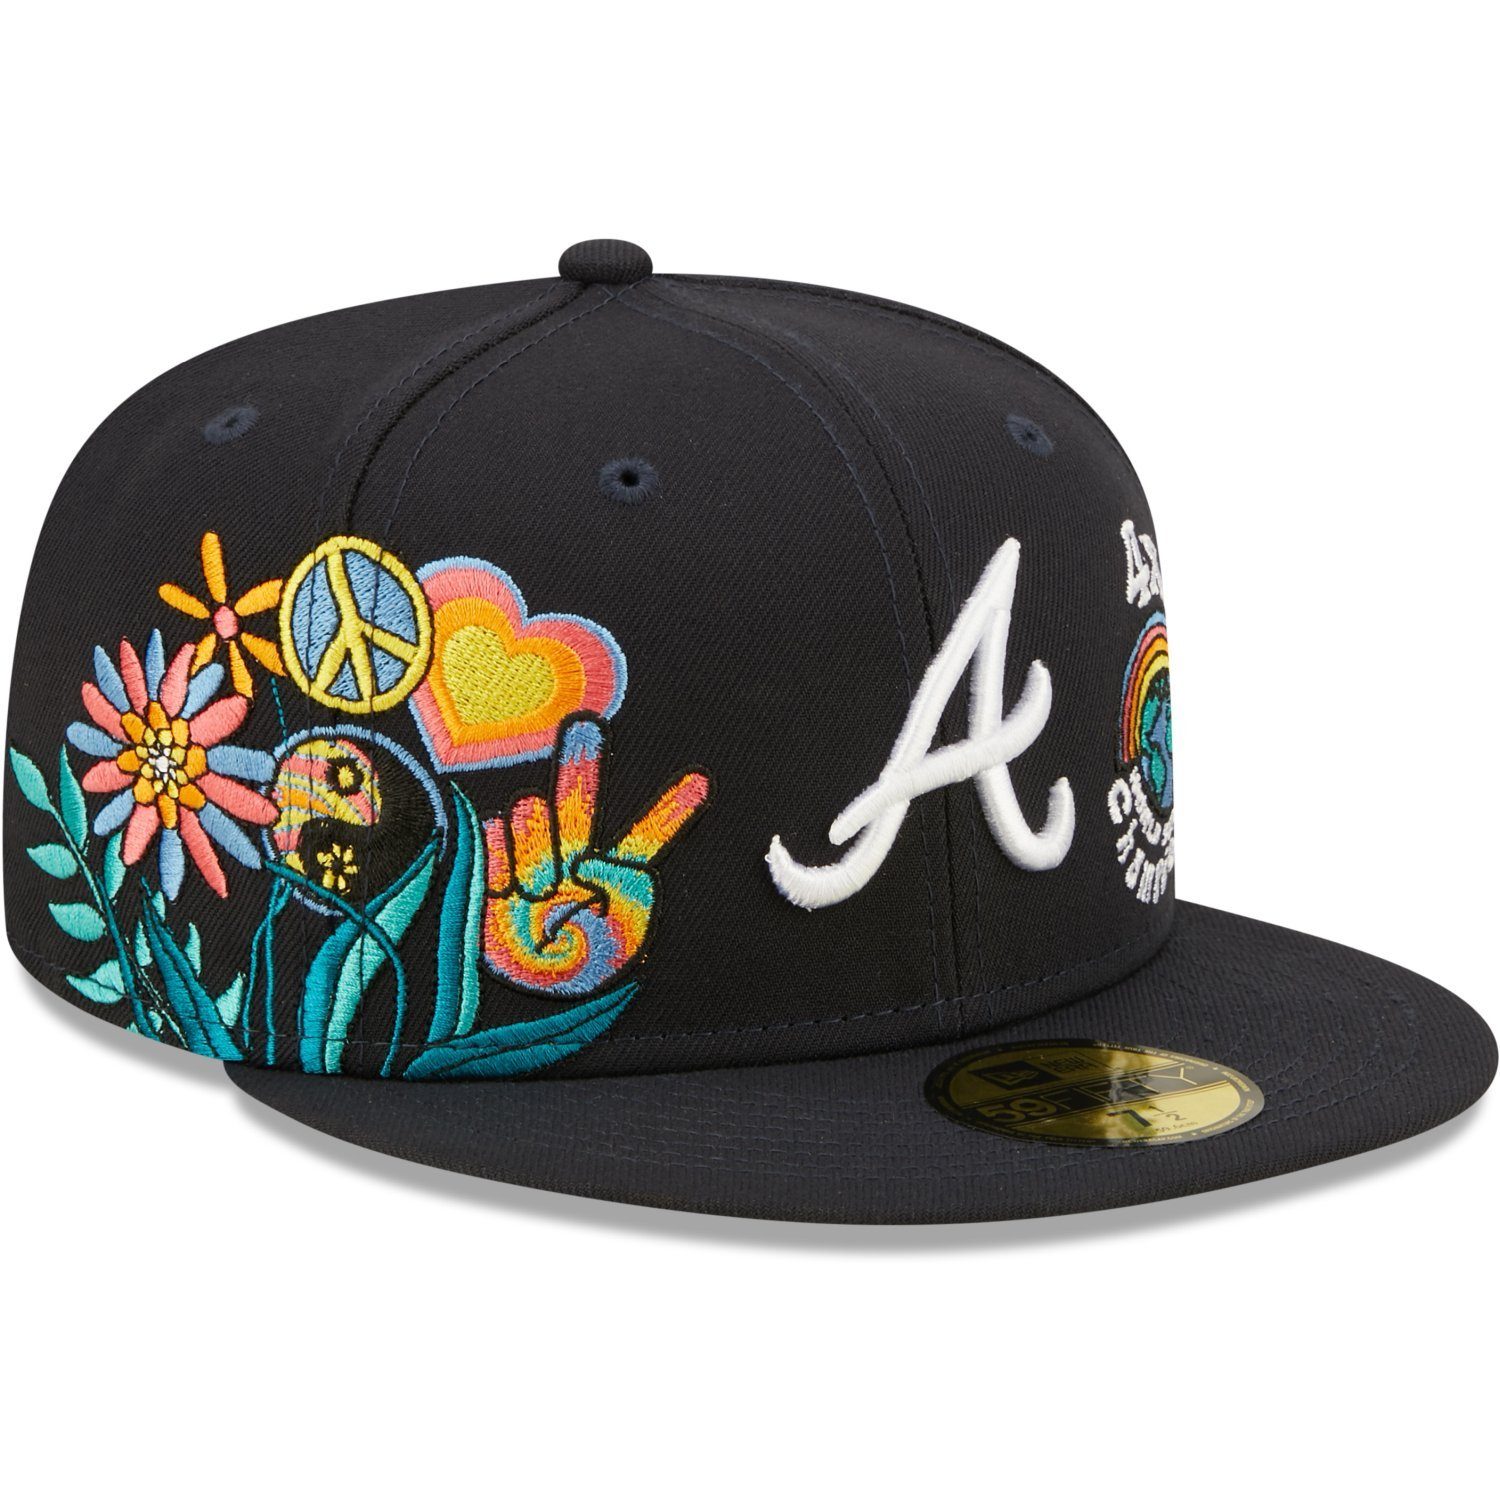 New Era Fitted Cap 59Fifty GROOVY Atlanta Braves